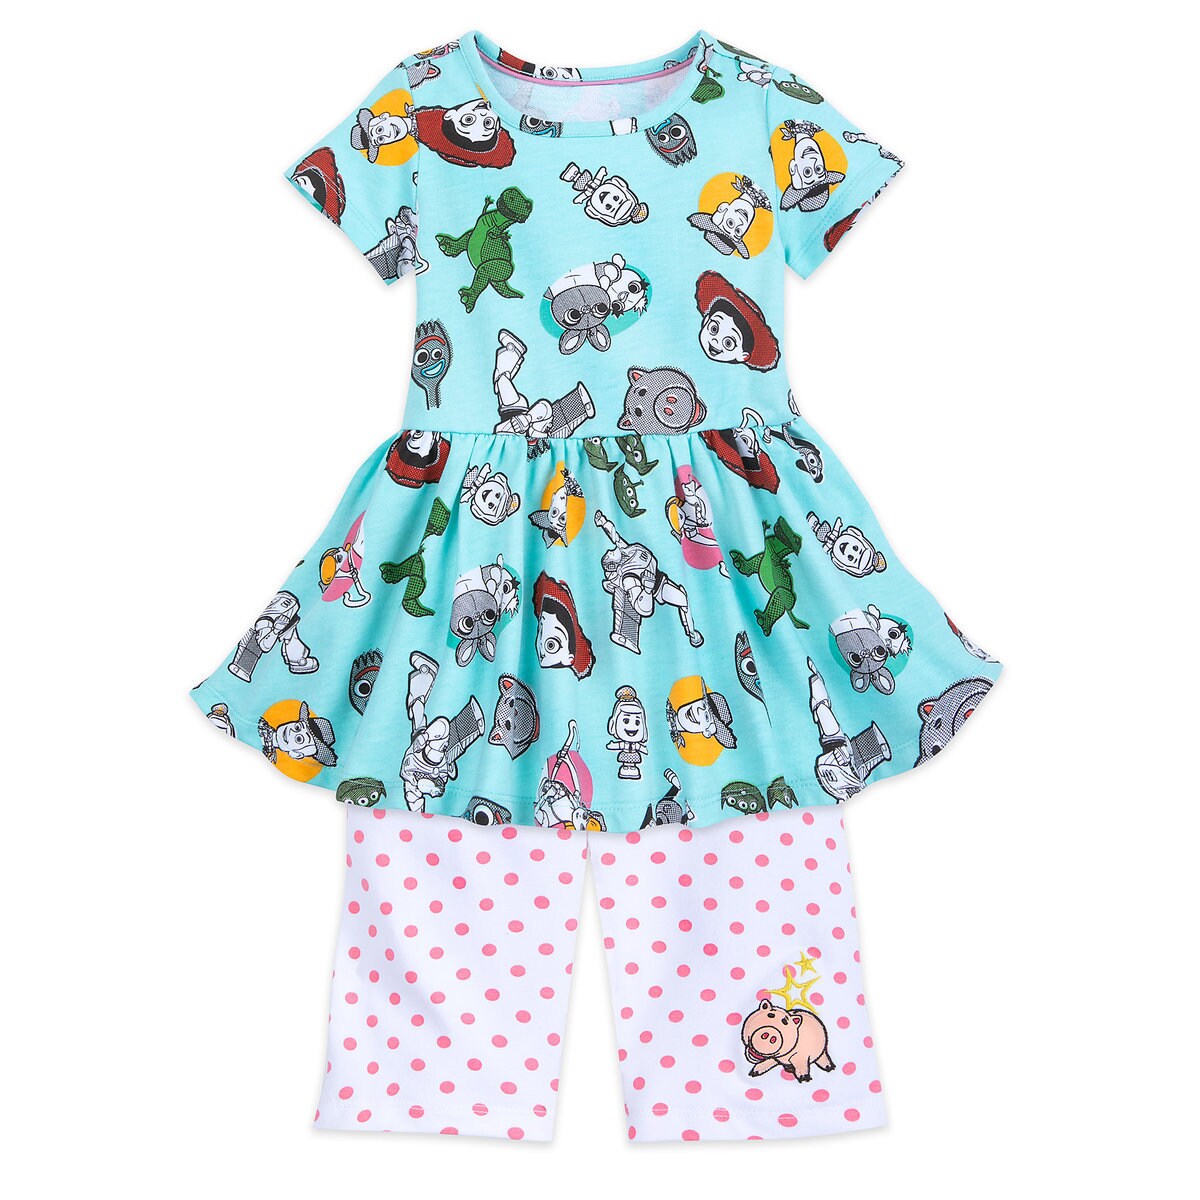 Product Image of Toy Story 4 Knit Top and Shorts Set for Girls # 1